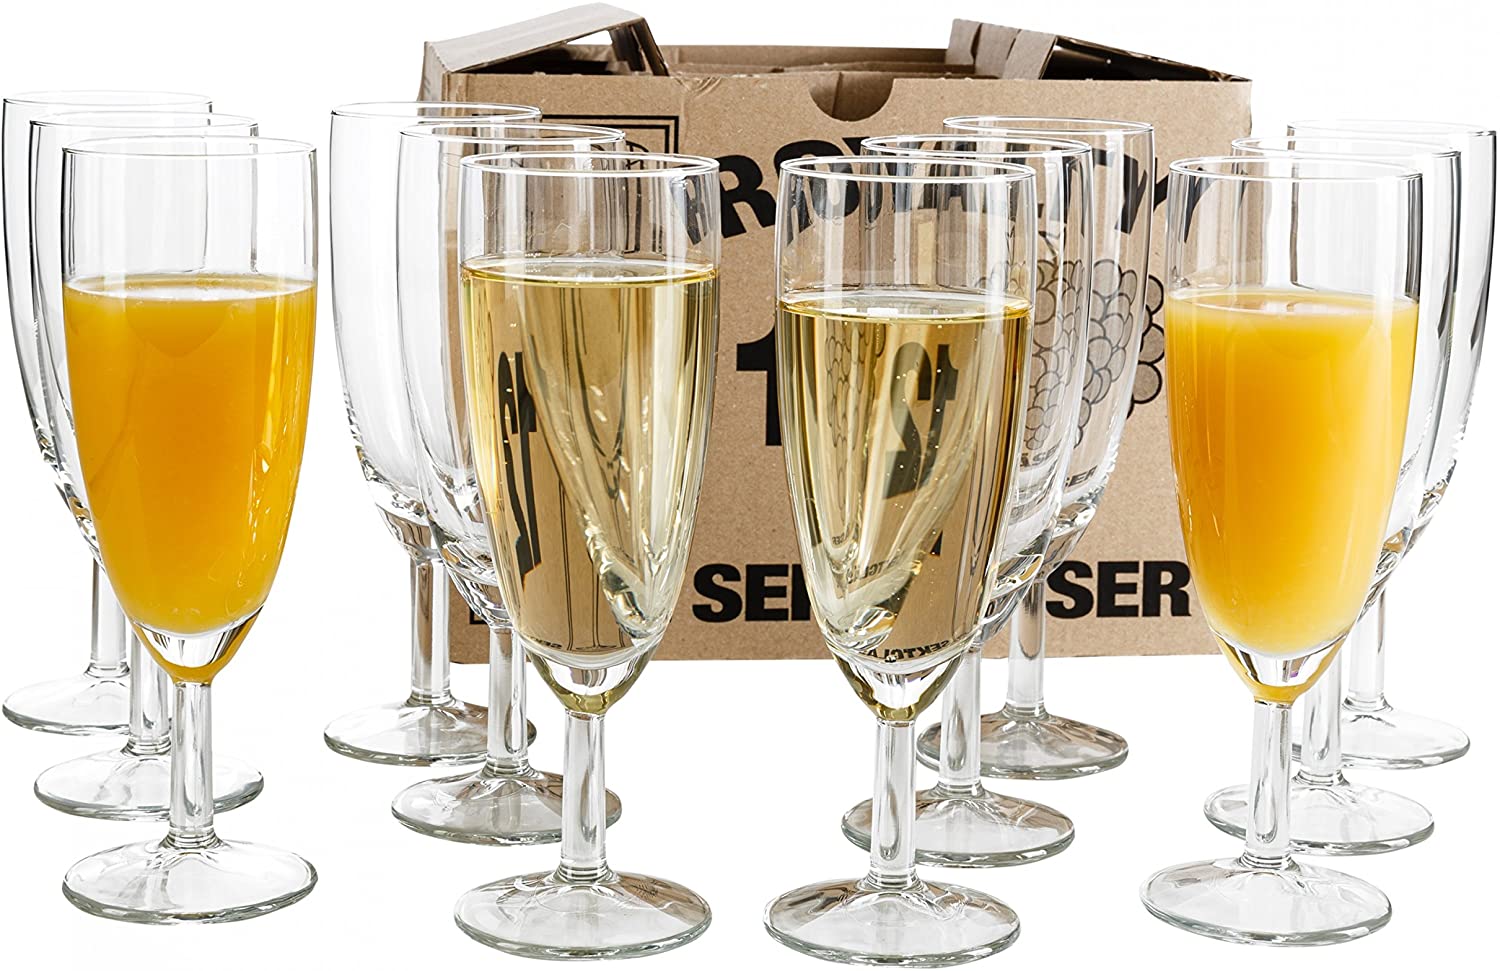 Van Well Royalty Set of 12 Champagne Flutes 0.1 L Calibrated Diameter 50 mm Height 160 mm Champagne Flute Chalice Glass Champagne and Prosecco Glass Party Glass Catering